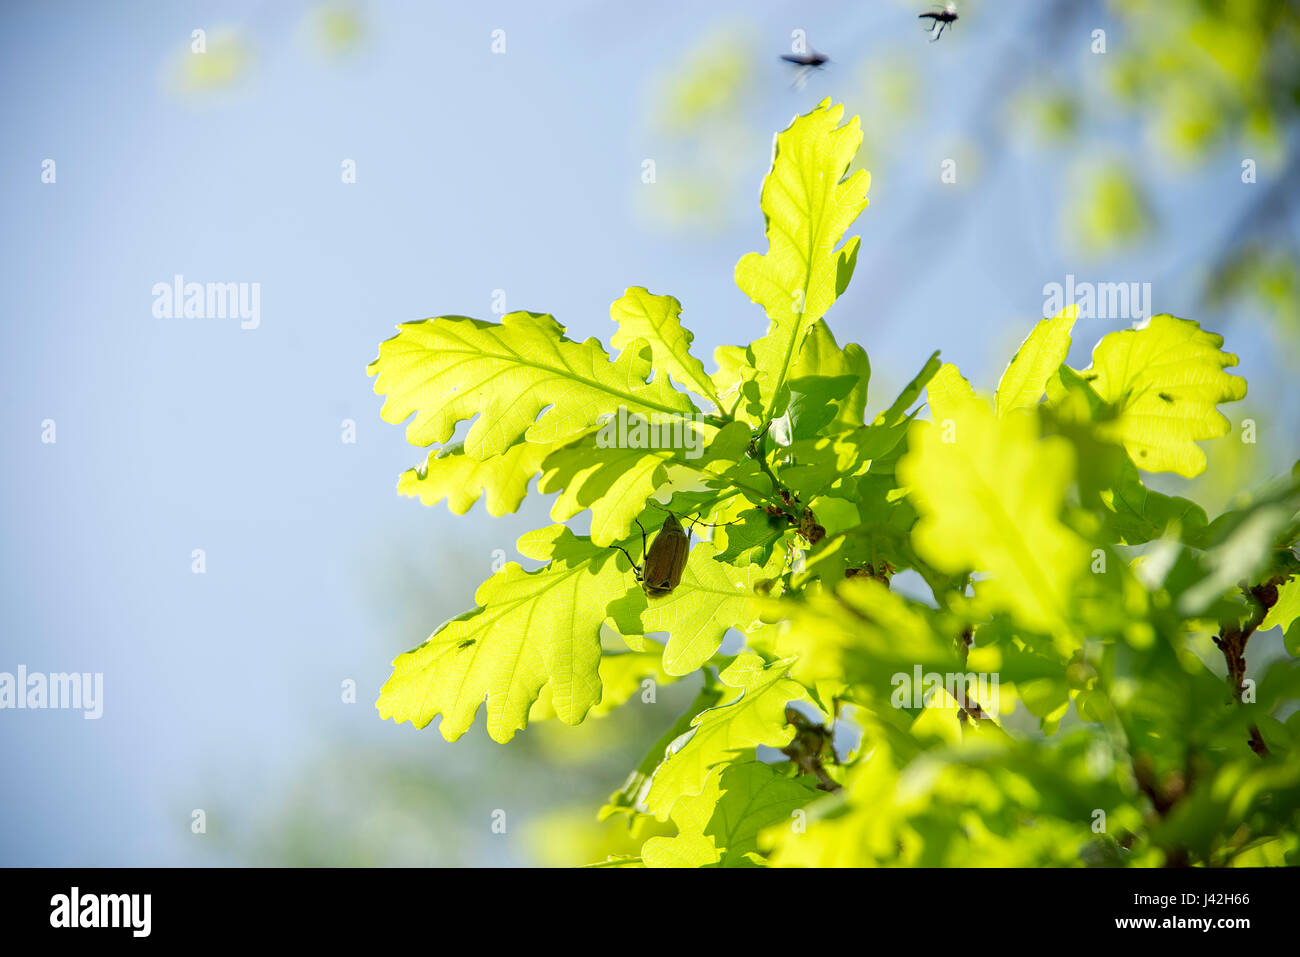 May bugs on a branches with leaves Stock Photo